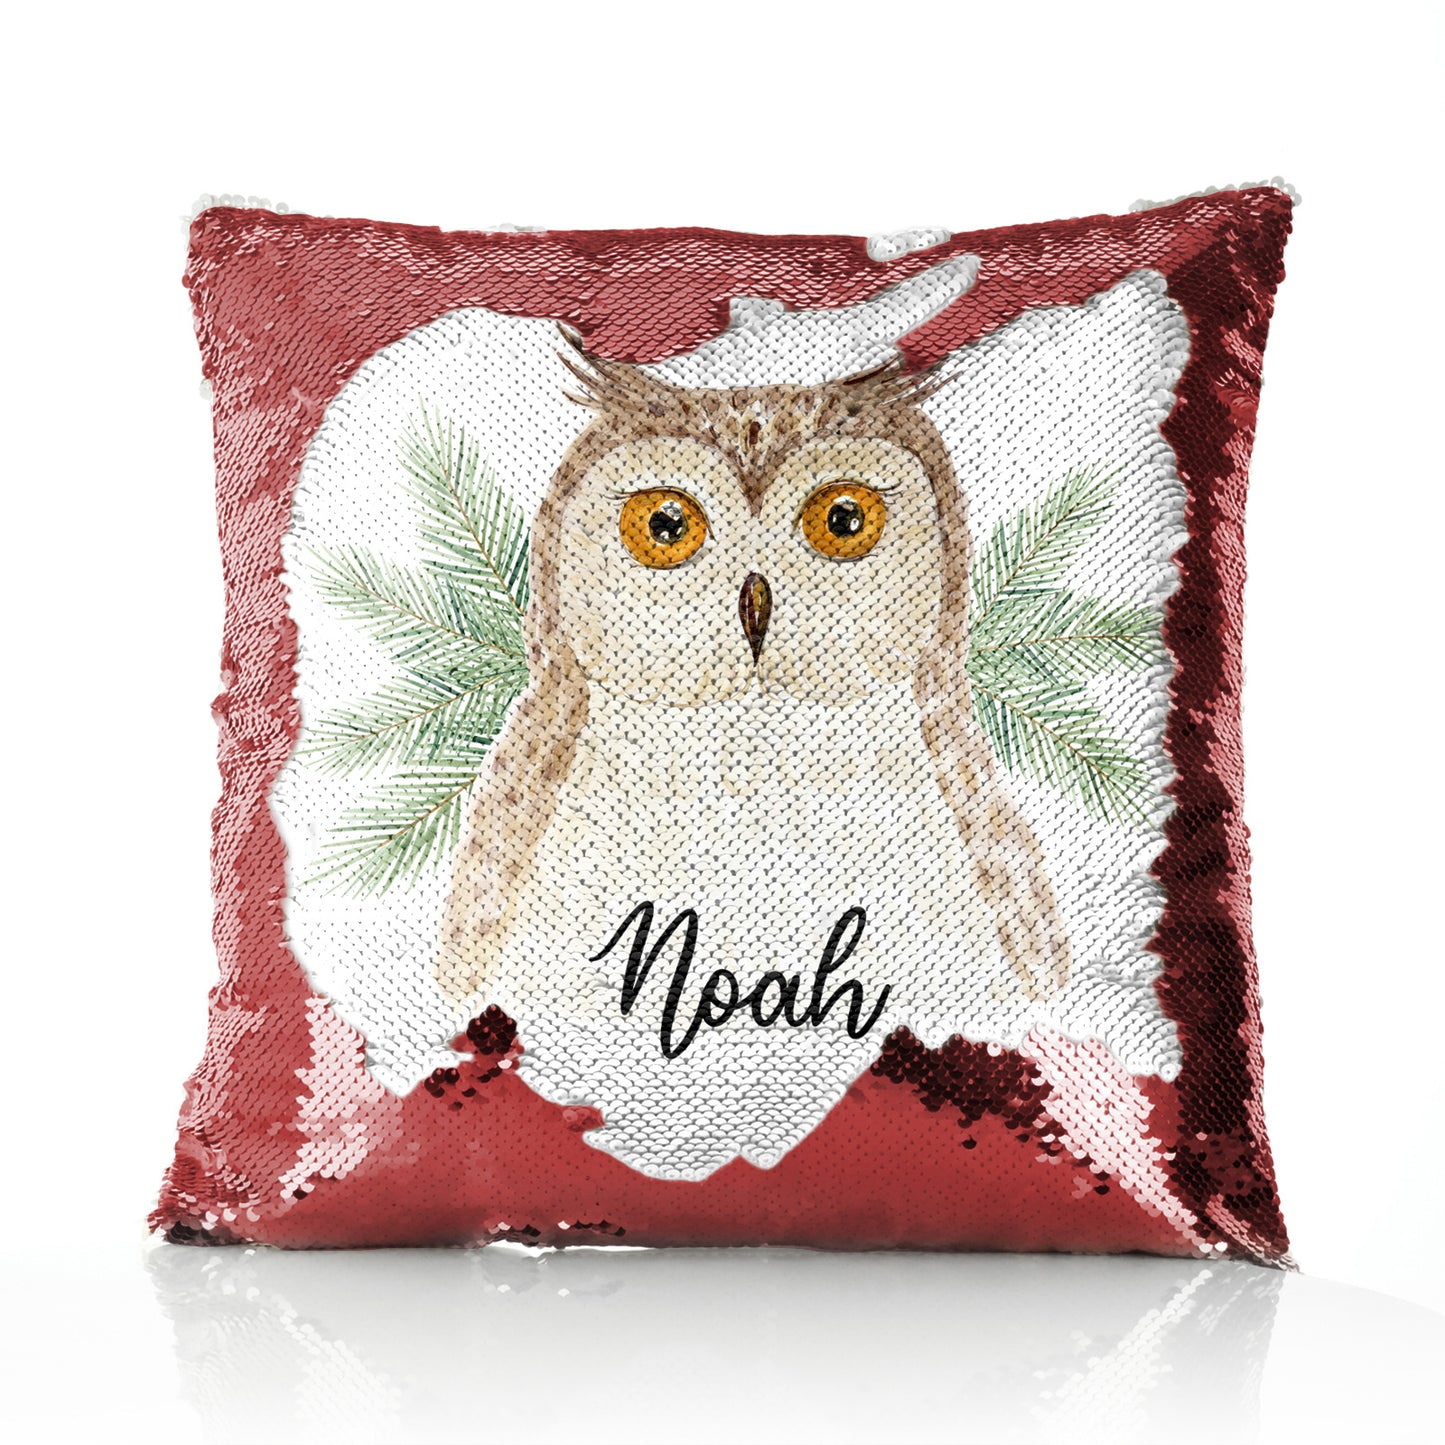 Personalised Sequin Cushion with Brown Owl Pine Tree and Cute Text